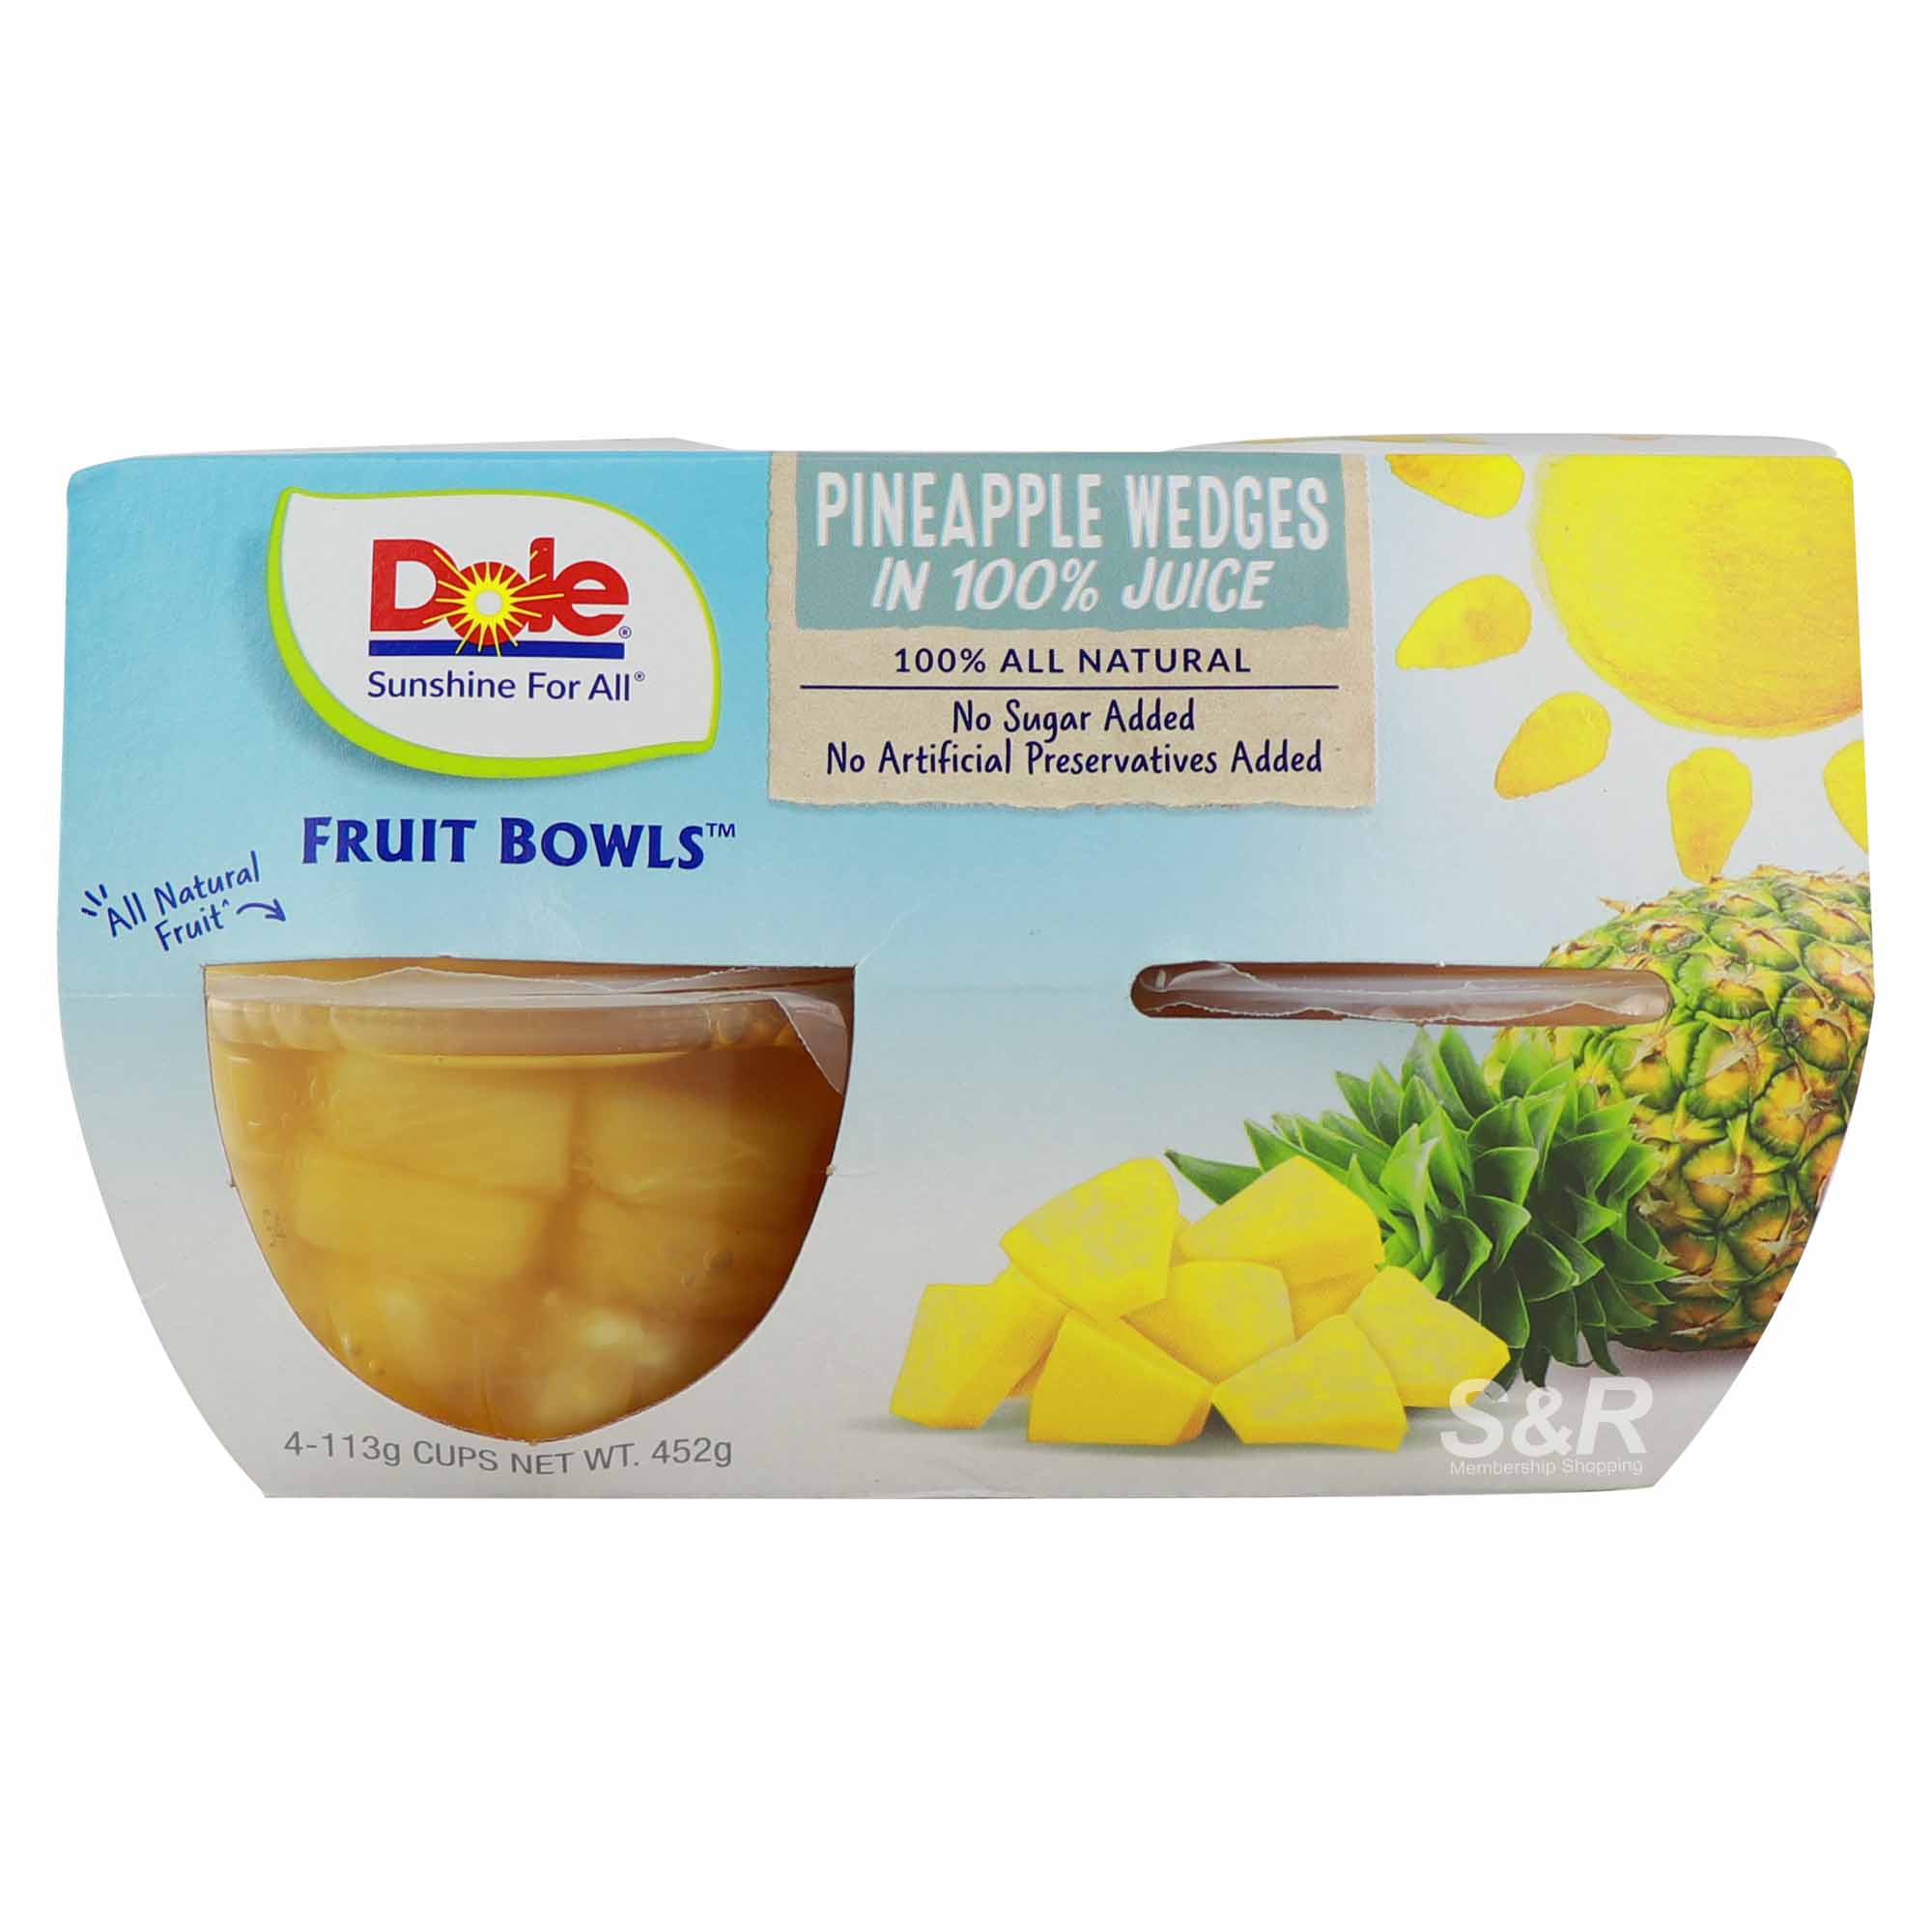 Dole Fruit Bowls Pineapple Wedges in Light Syrup 4pcs